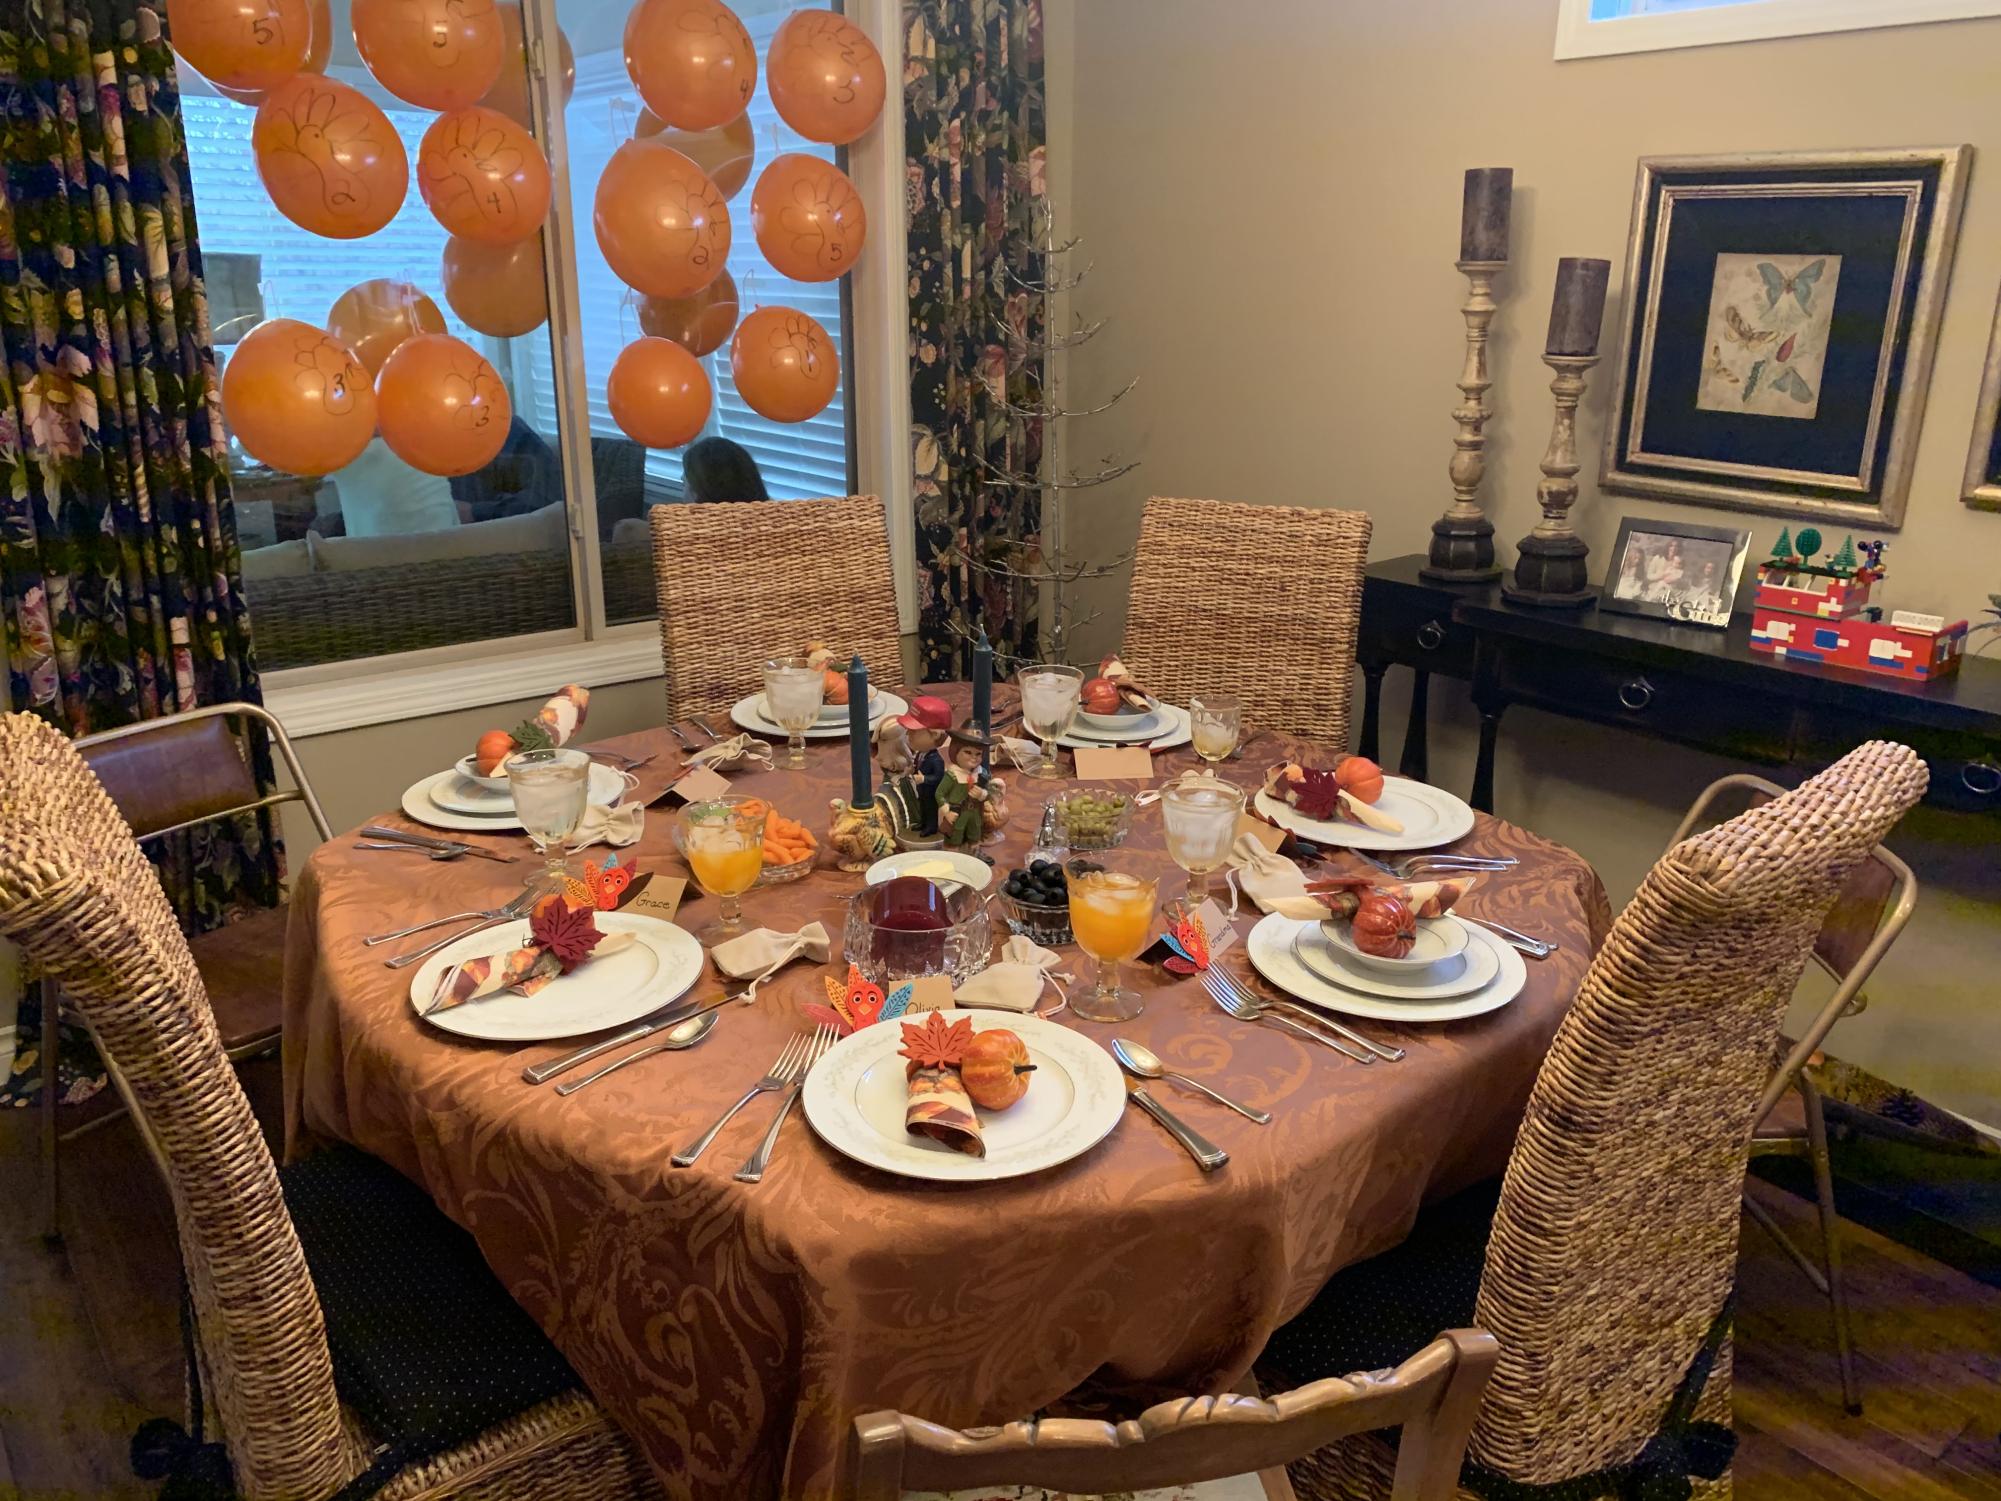 The elaborate setup for the anticipated turkey shoot, with orange balloons representing turkeys. Photo used with permission by Nichole Miner. 